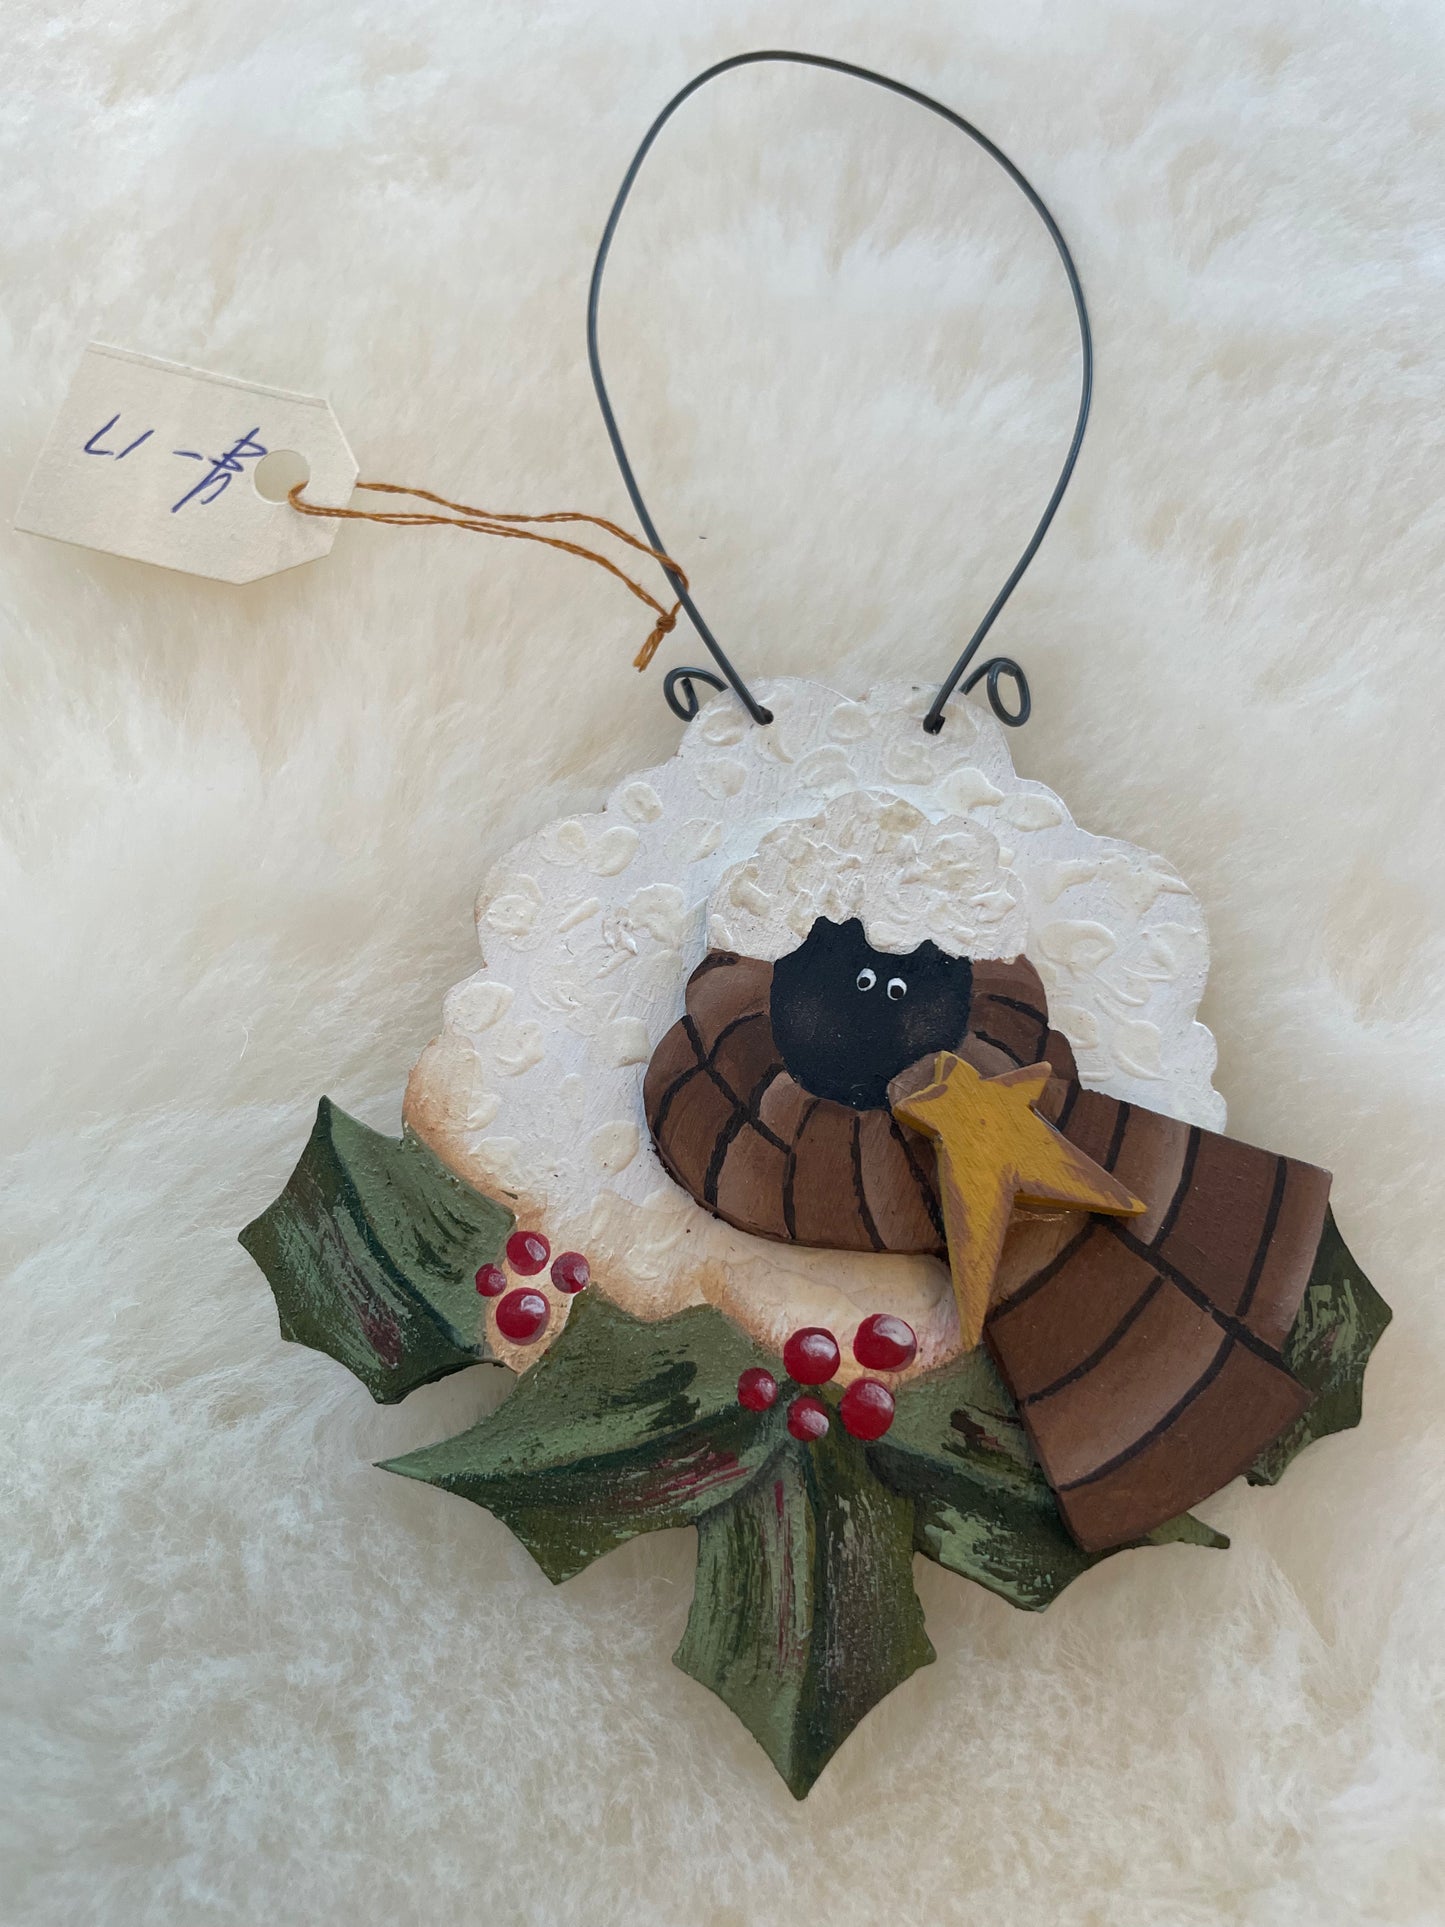 YE-17 Sheep Ornament - Wooden hand painted